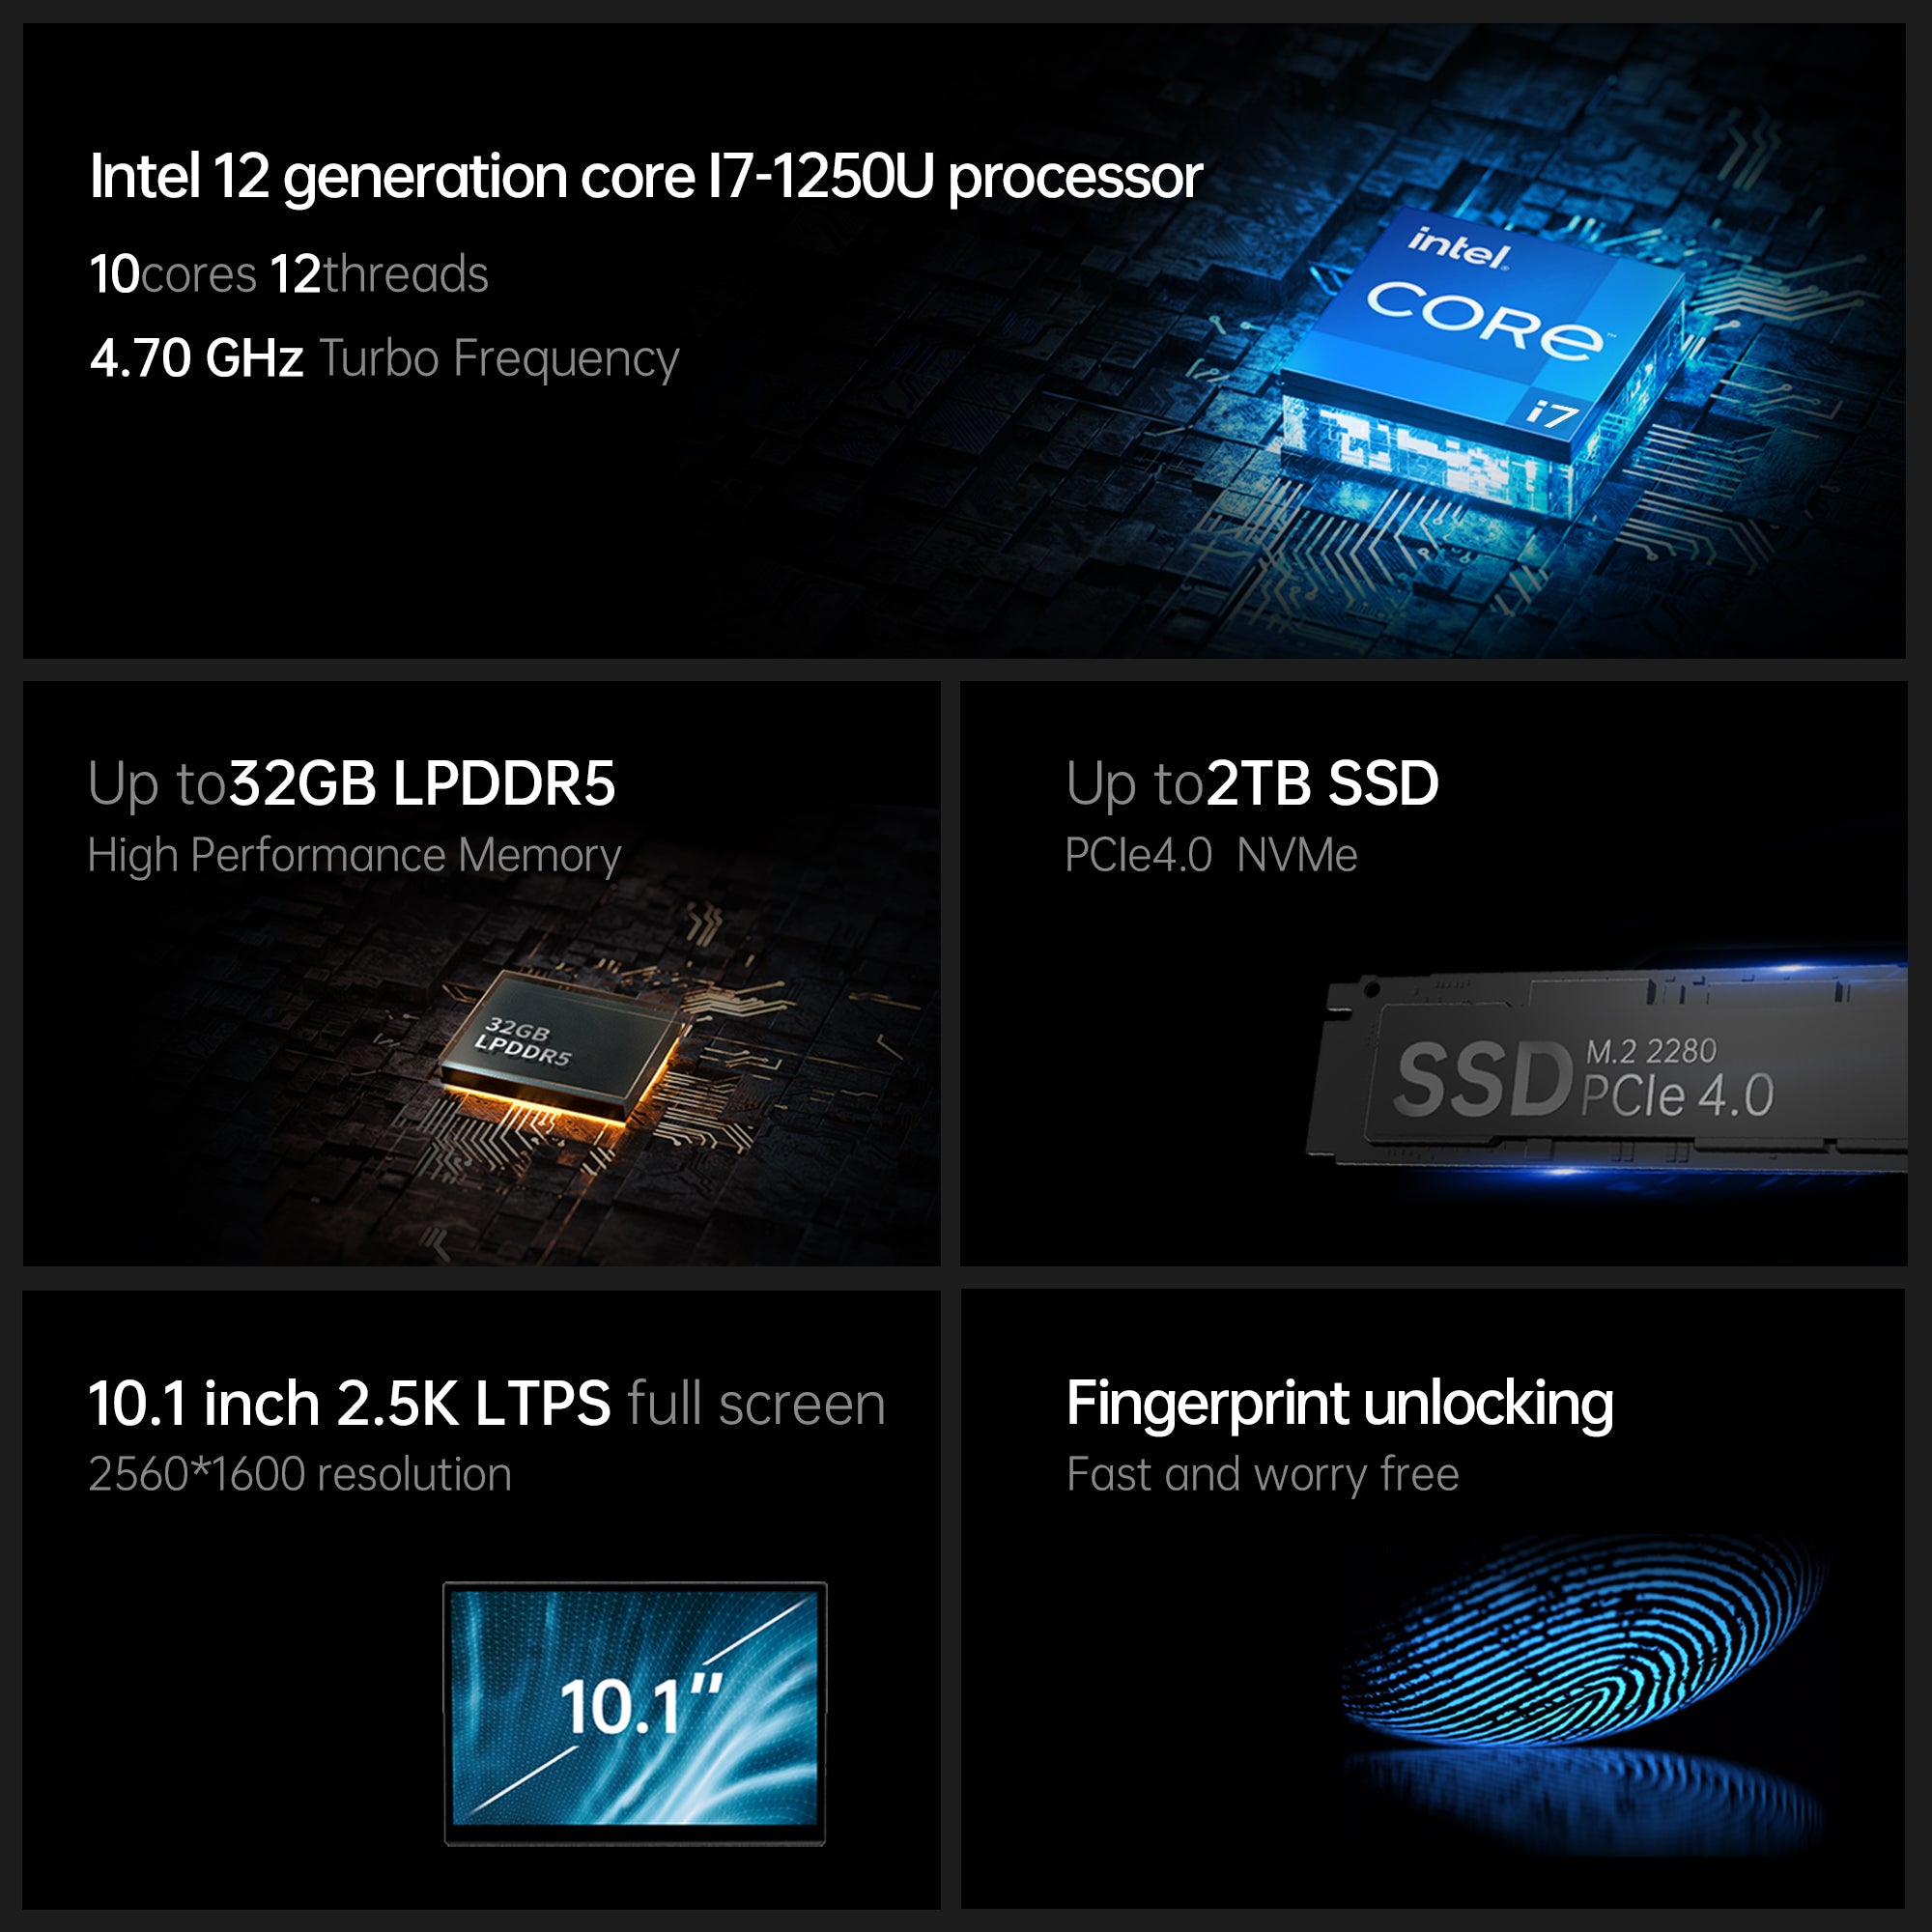 One-Netbook 5 - Intel i7 1250U (Pre-Order Now, Shipping Begins October 8th)